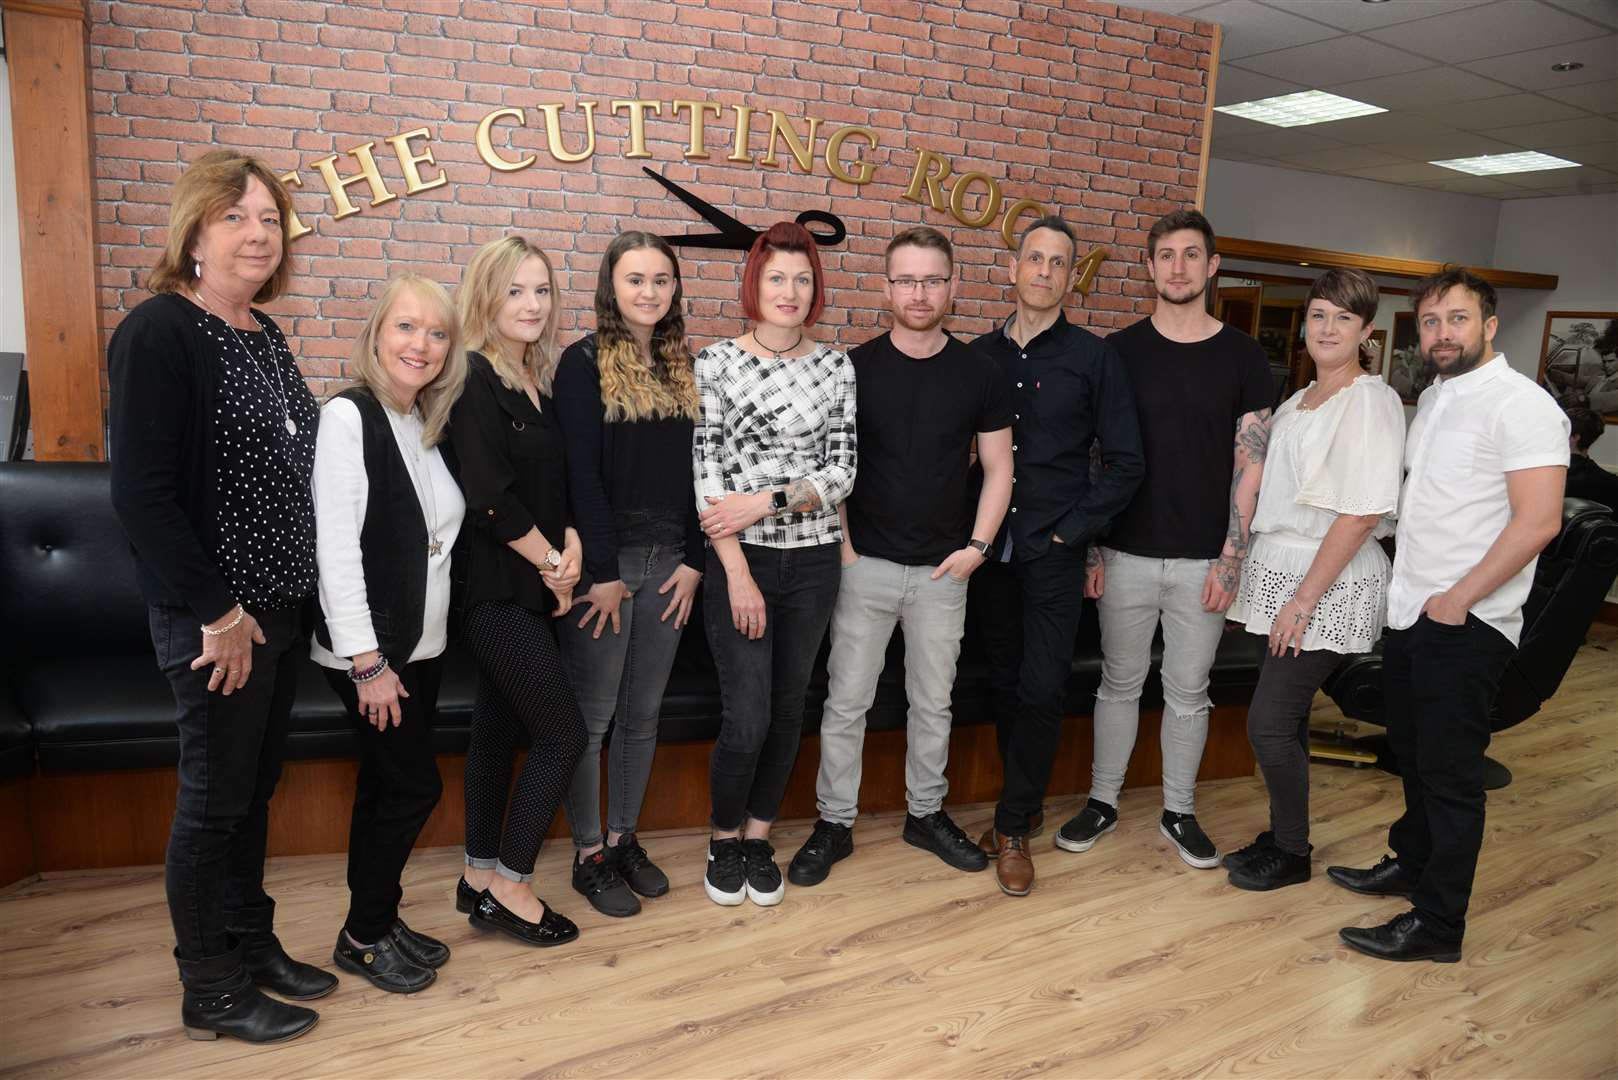 Chris Delsignore, left and her son Lee Wood, right with their staff at the Men's Cutting Room in Queen Street, Deal who are celebrating 20 years in business